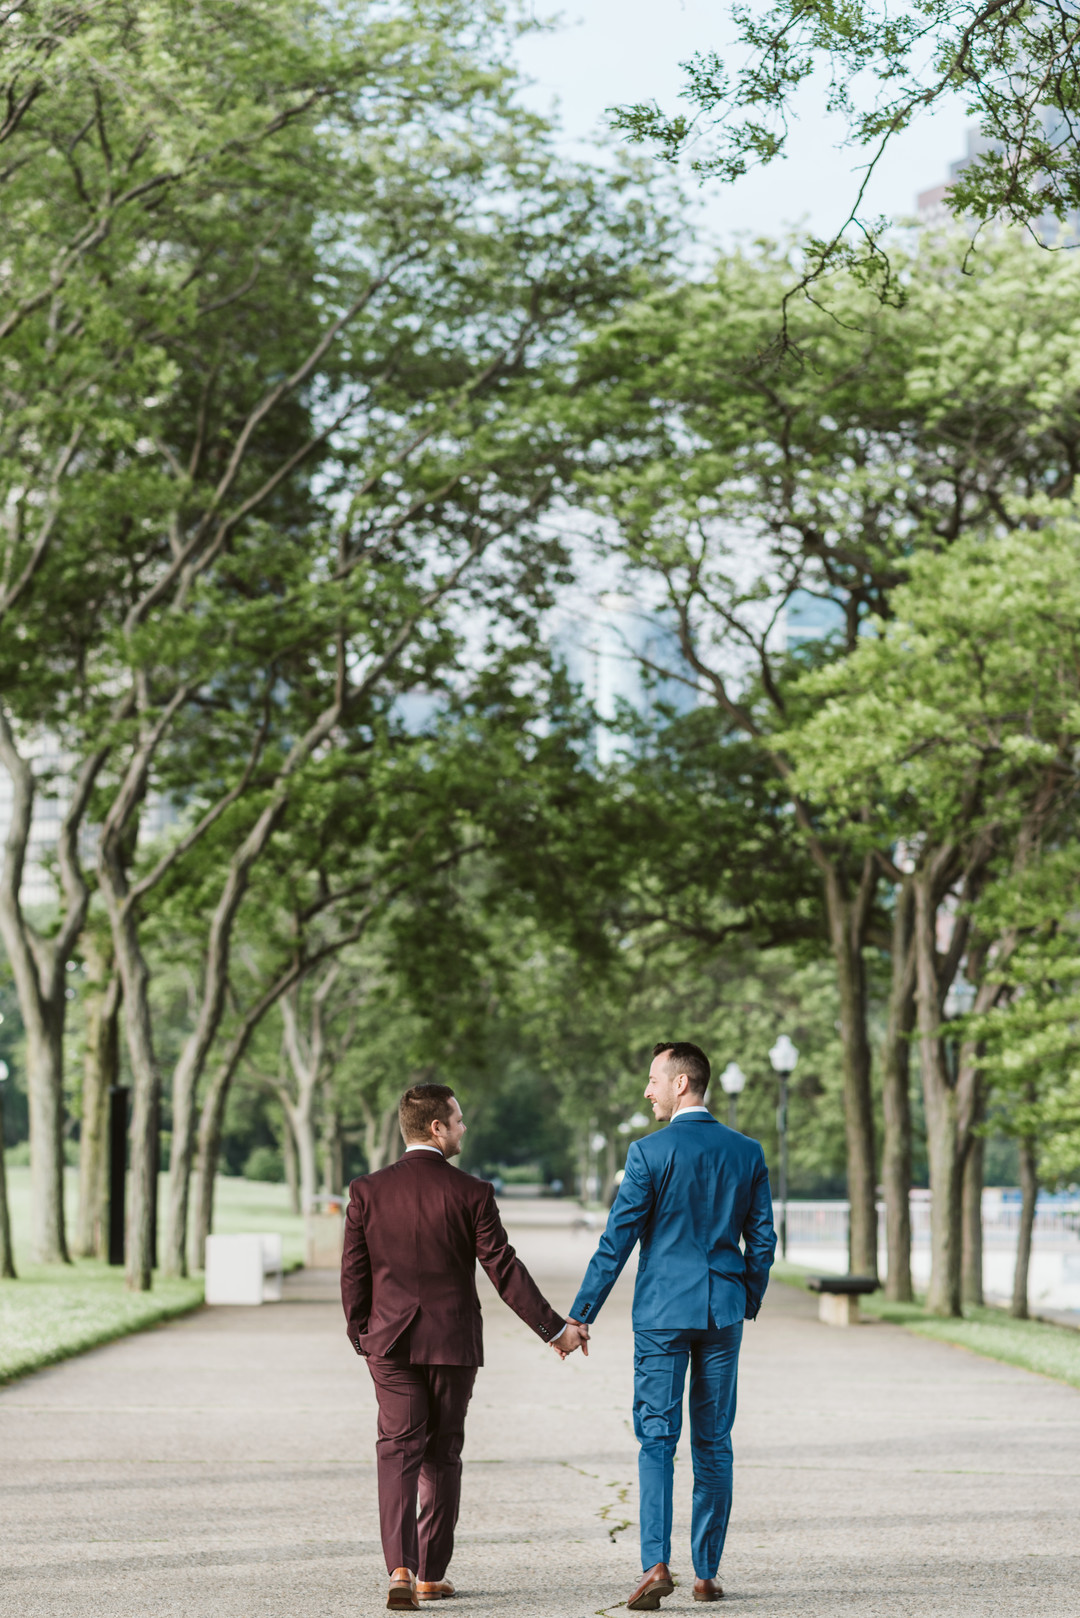 Stylish Downtown Chicago Engagement captured by Gavyn Taylor Photo. See more engagement photo ideas on CHItheeWED.com!